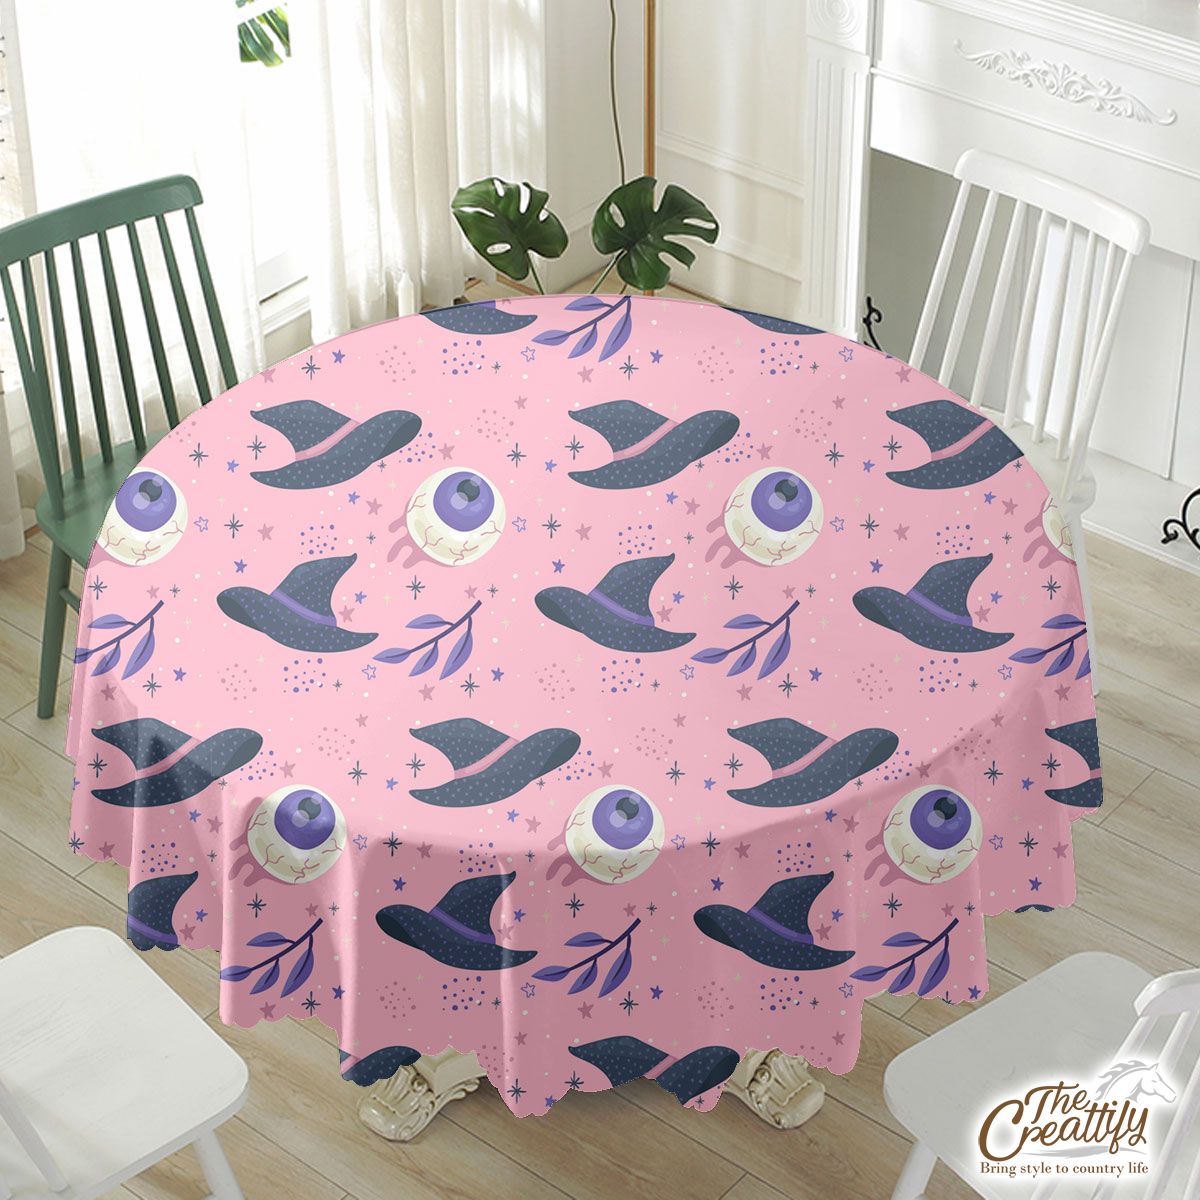 Halloween Witch Hat Halloween Eyes On The Pink Background Waterproof Tablecloth